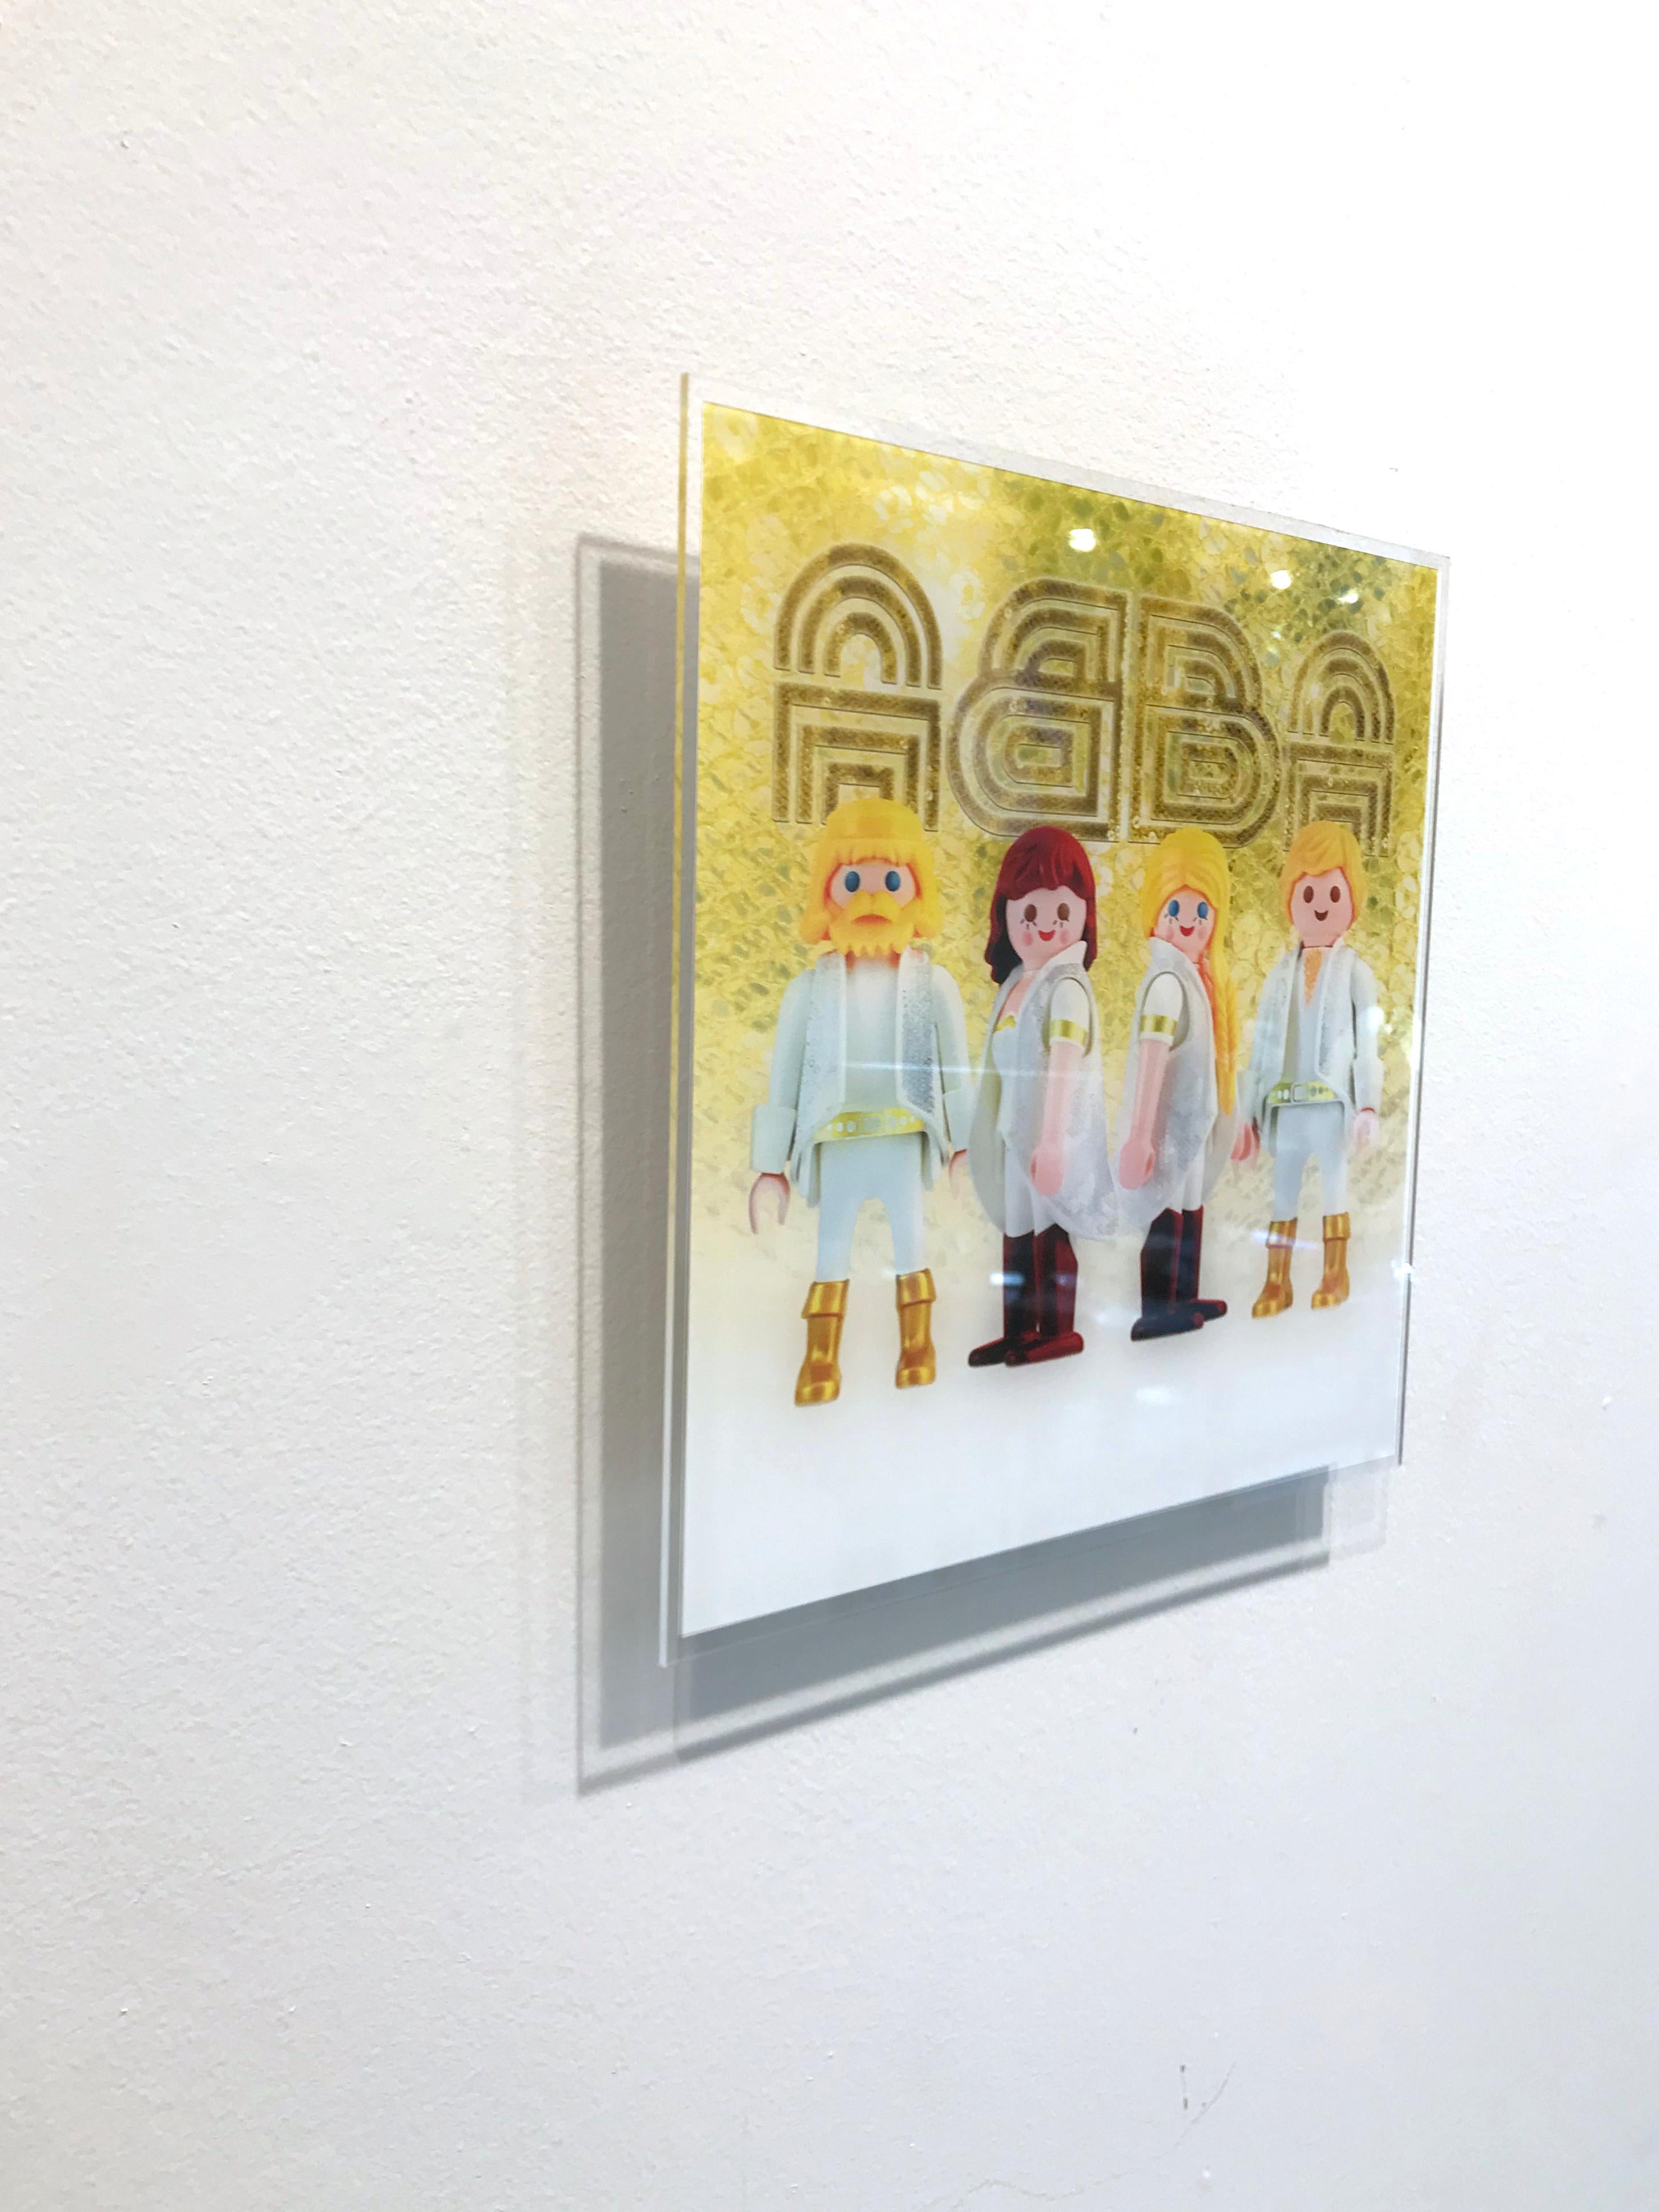 This limited edition photograph is created using Playmobil figurines arranged in a customized scene. In this piece, Unglik is inspired by ABBA, a Swedish pop group that formed in Stockholm in 1972. Edition of 15. It is signed on the back by the